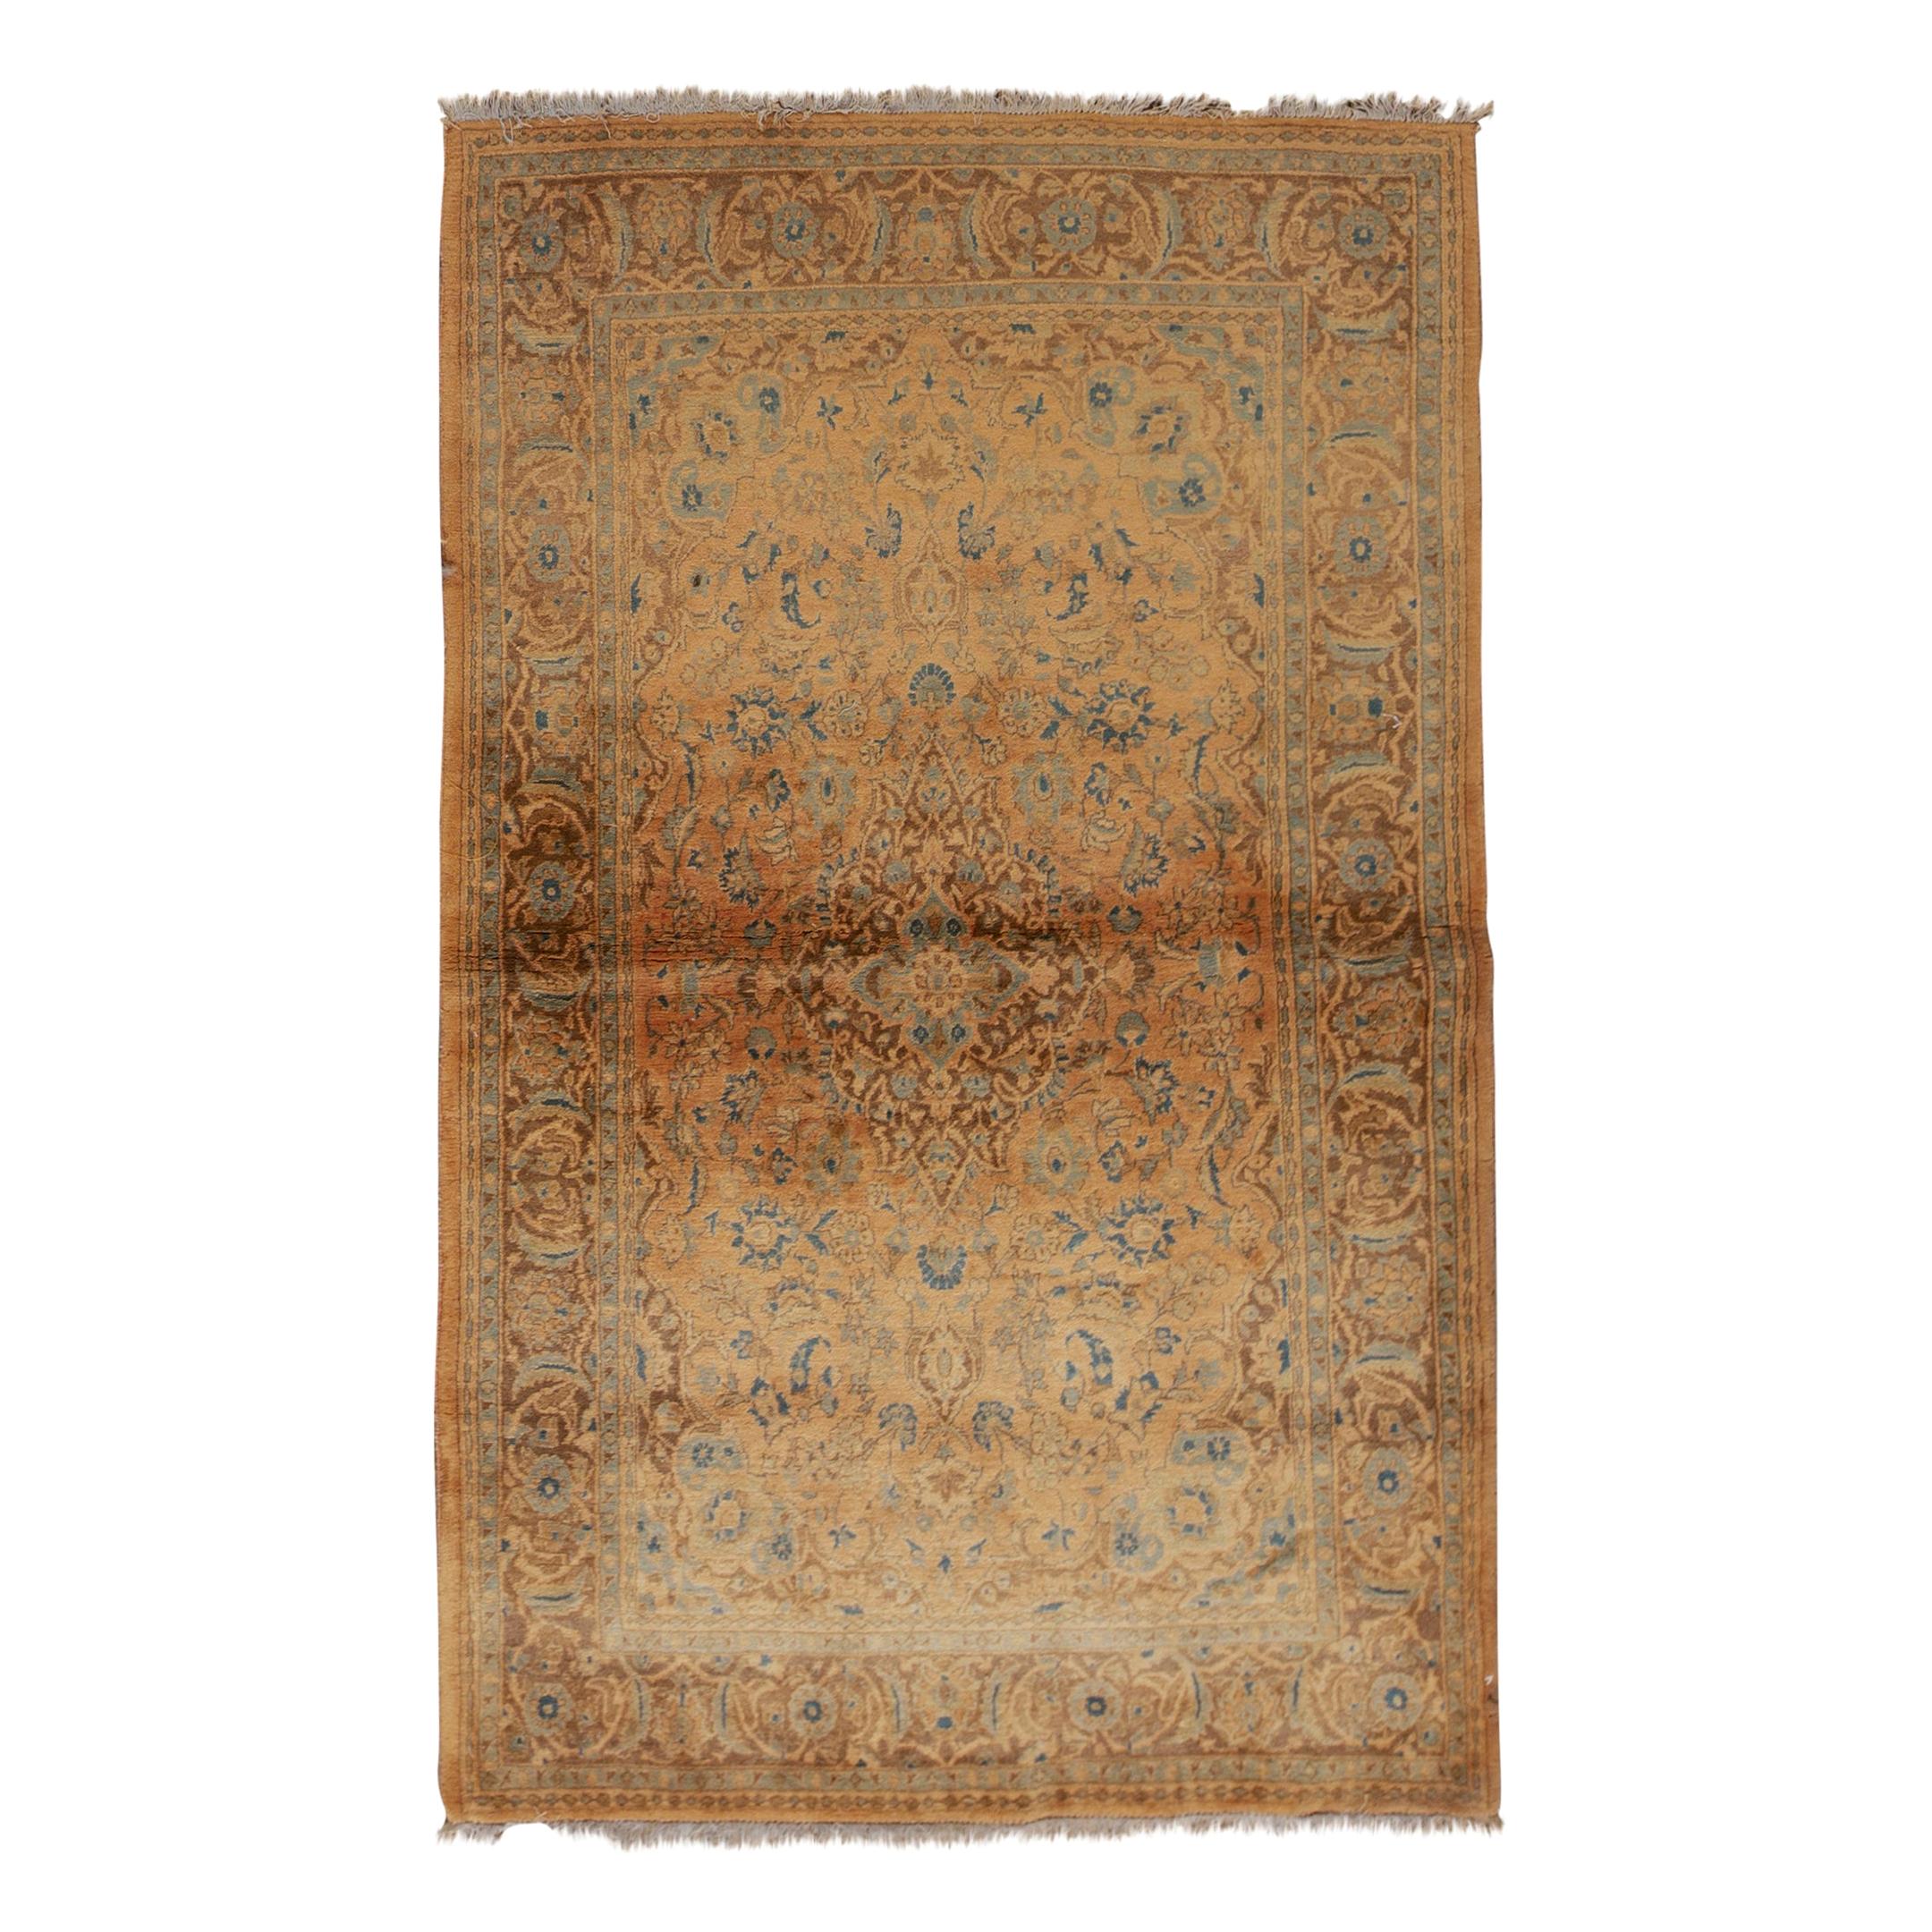  Antique Persian fine Traditional Handwoven Luxury Wool Gold / Brown Rug For Sale